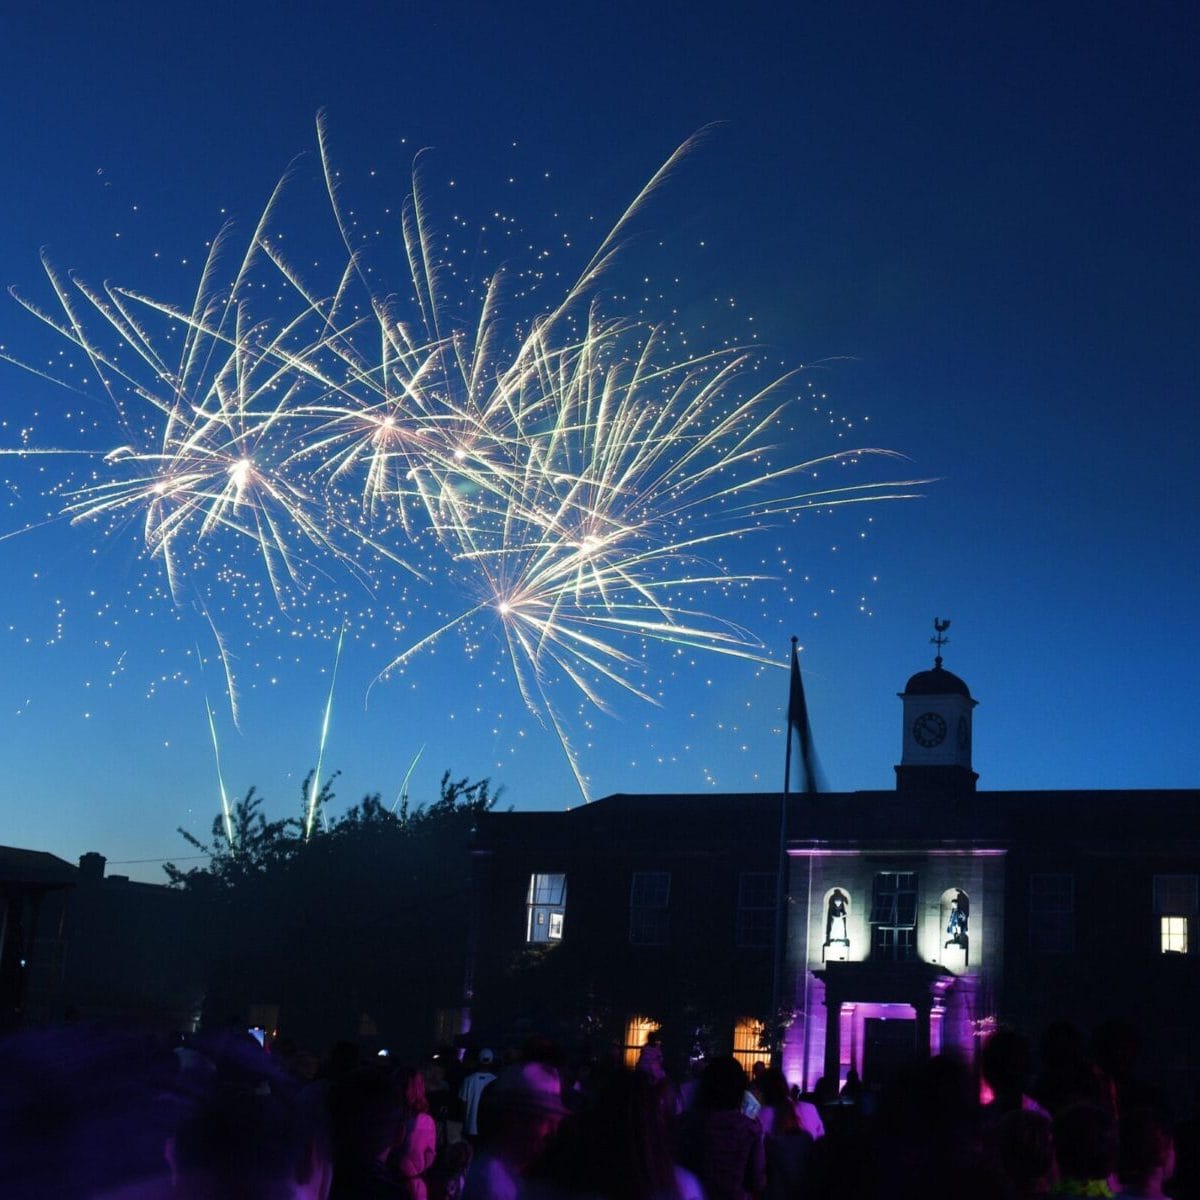 Fireworks exploding above the Blue Coat School entrance as people watch below in honour of the School's 300th anniversary